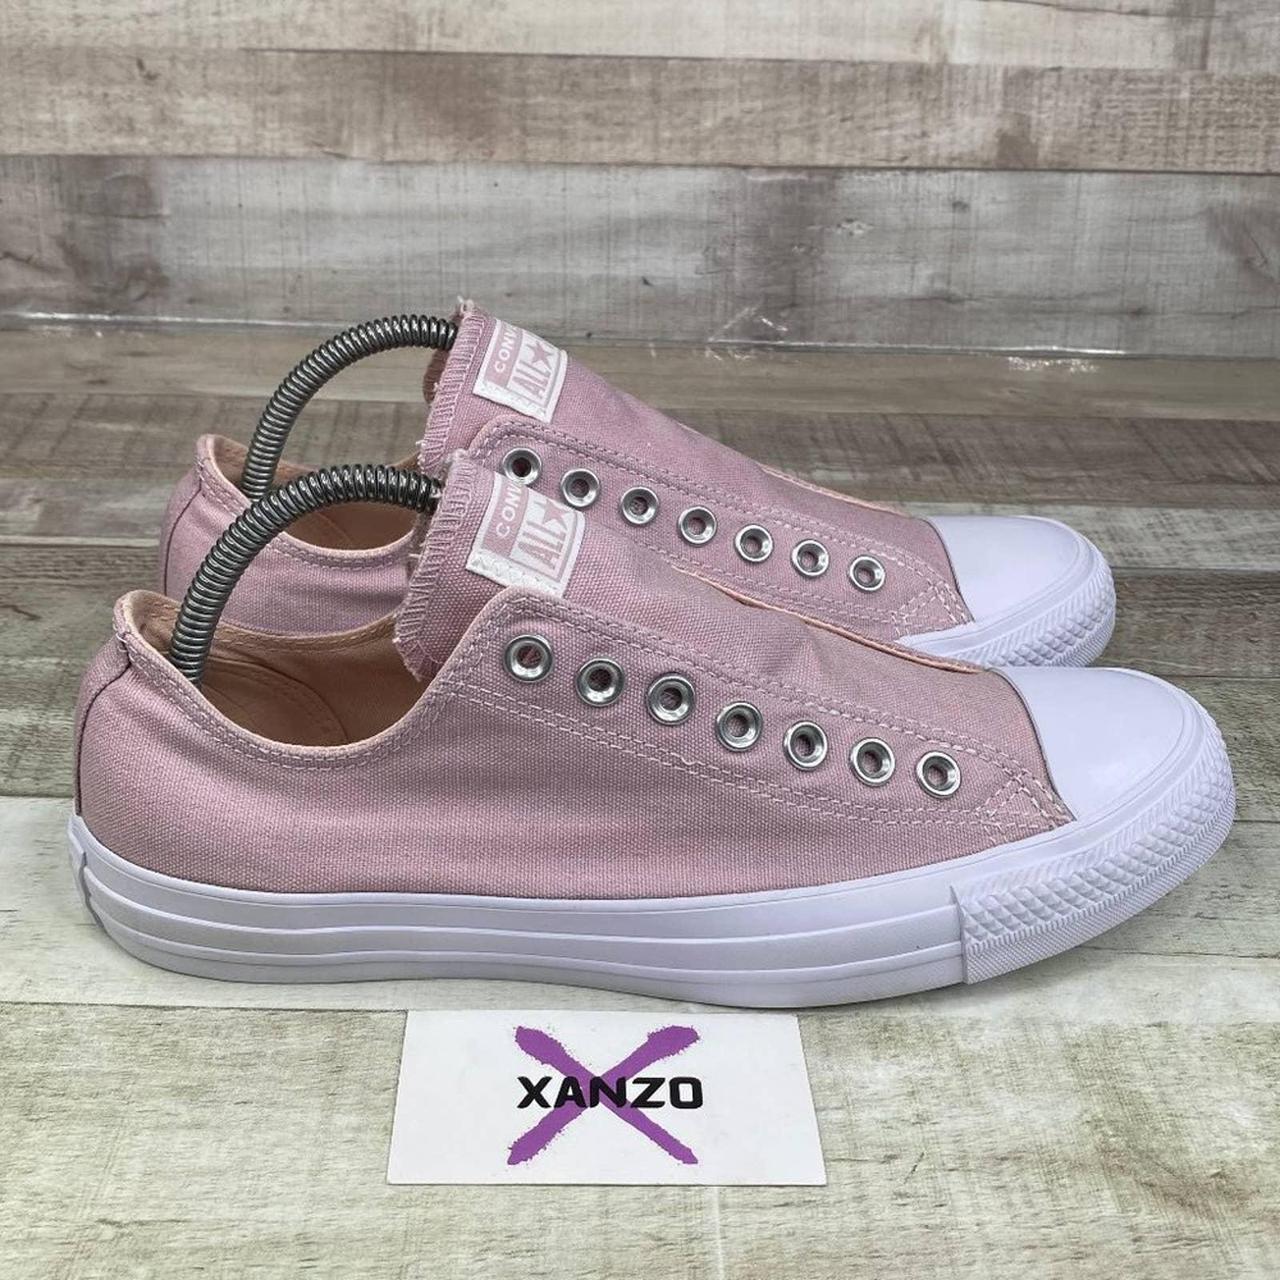 Encarnar Resentimiento pedazo Converse Women's Pink Trainers | Depop